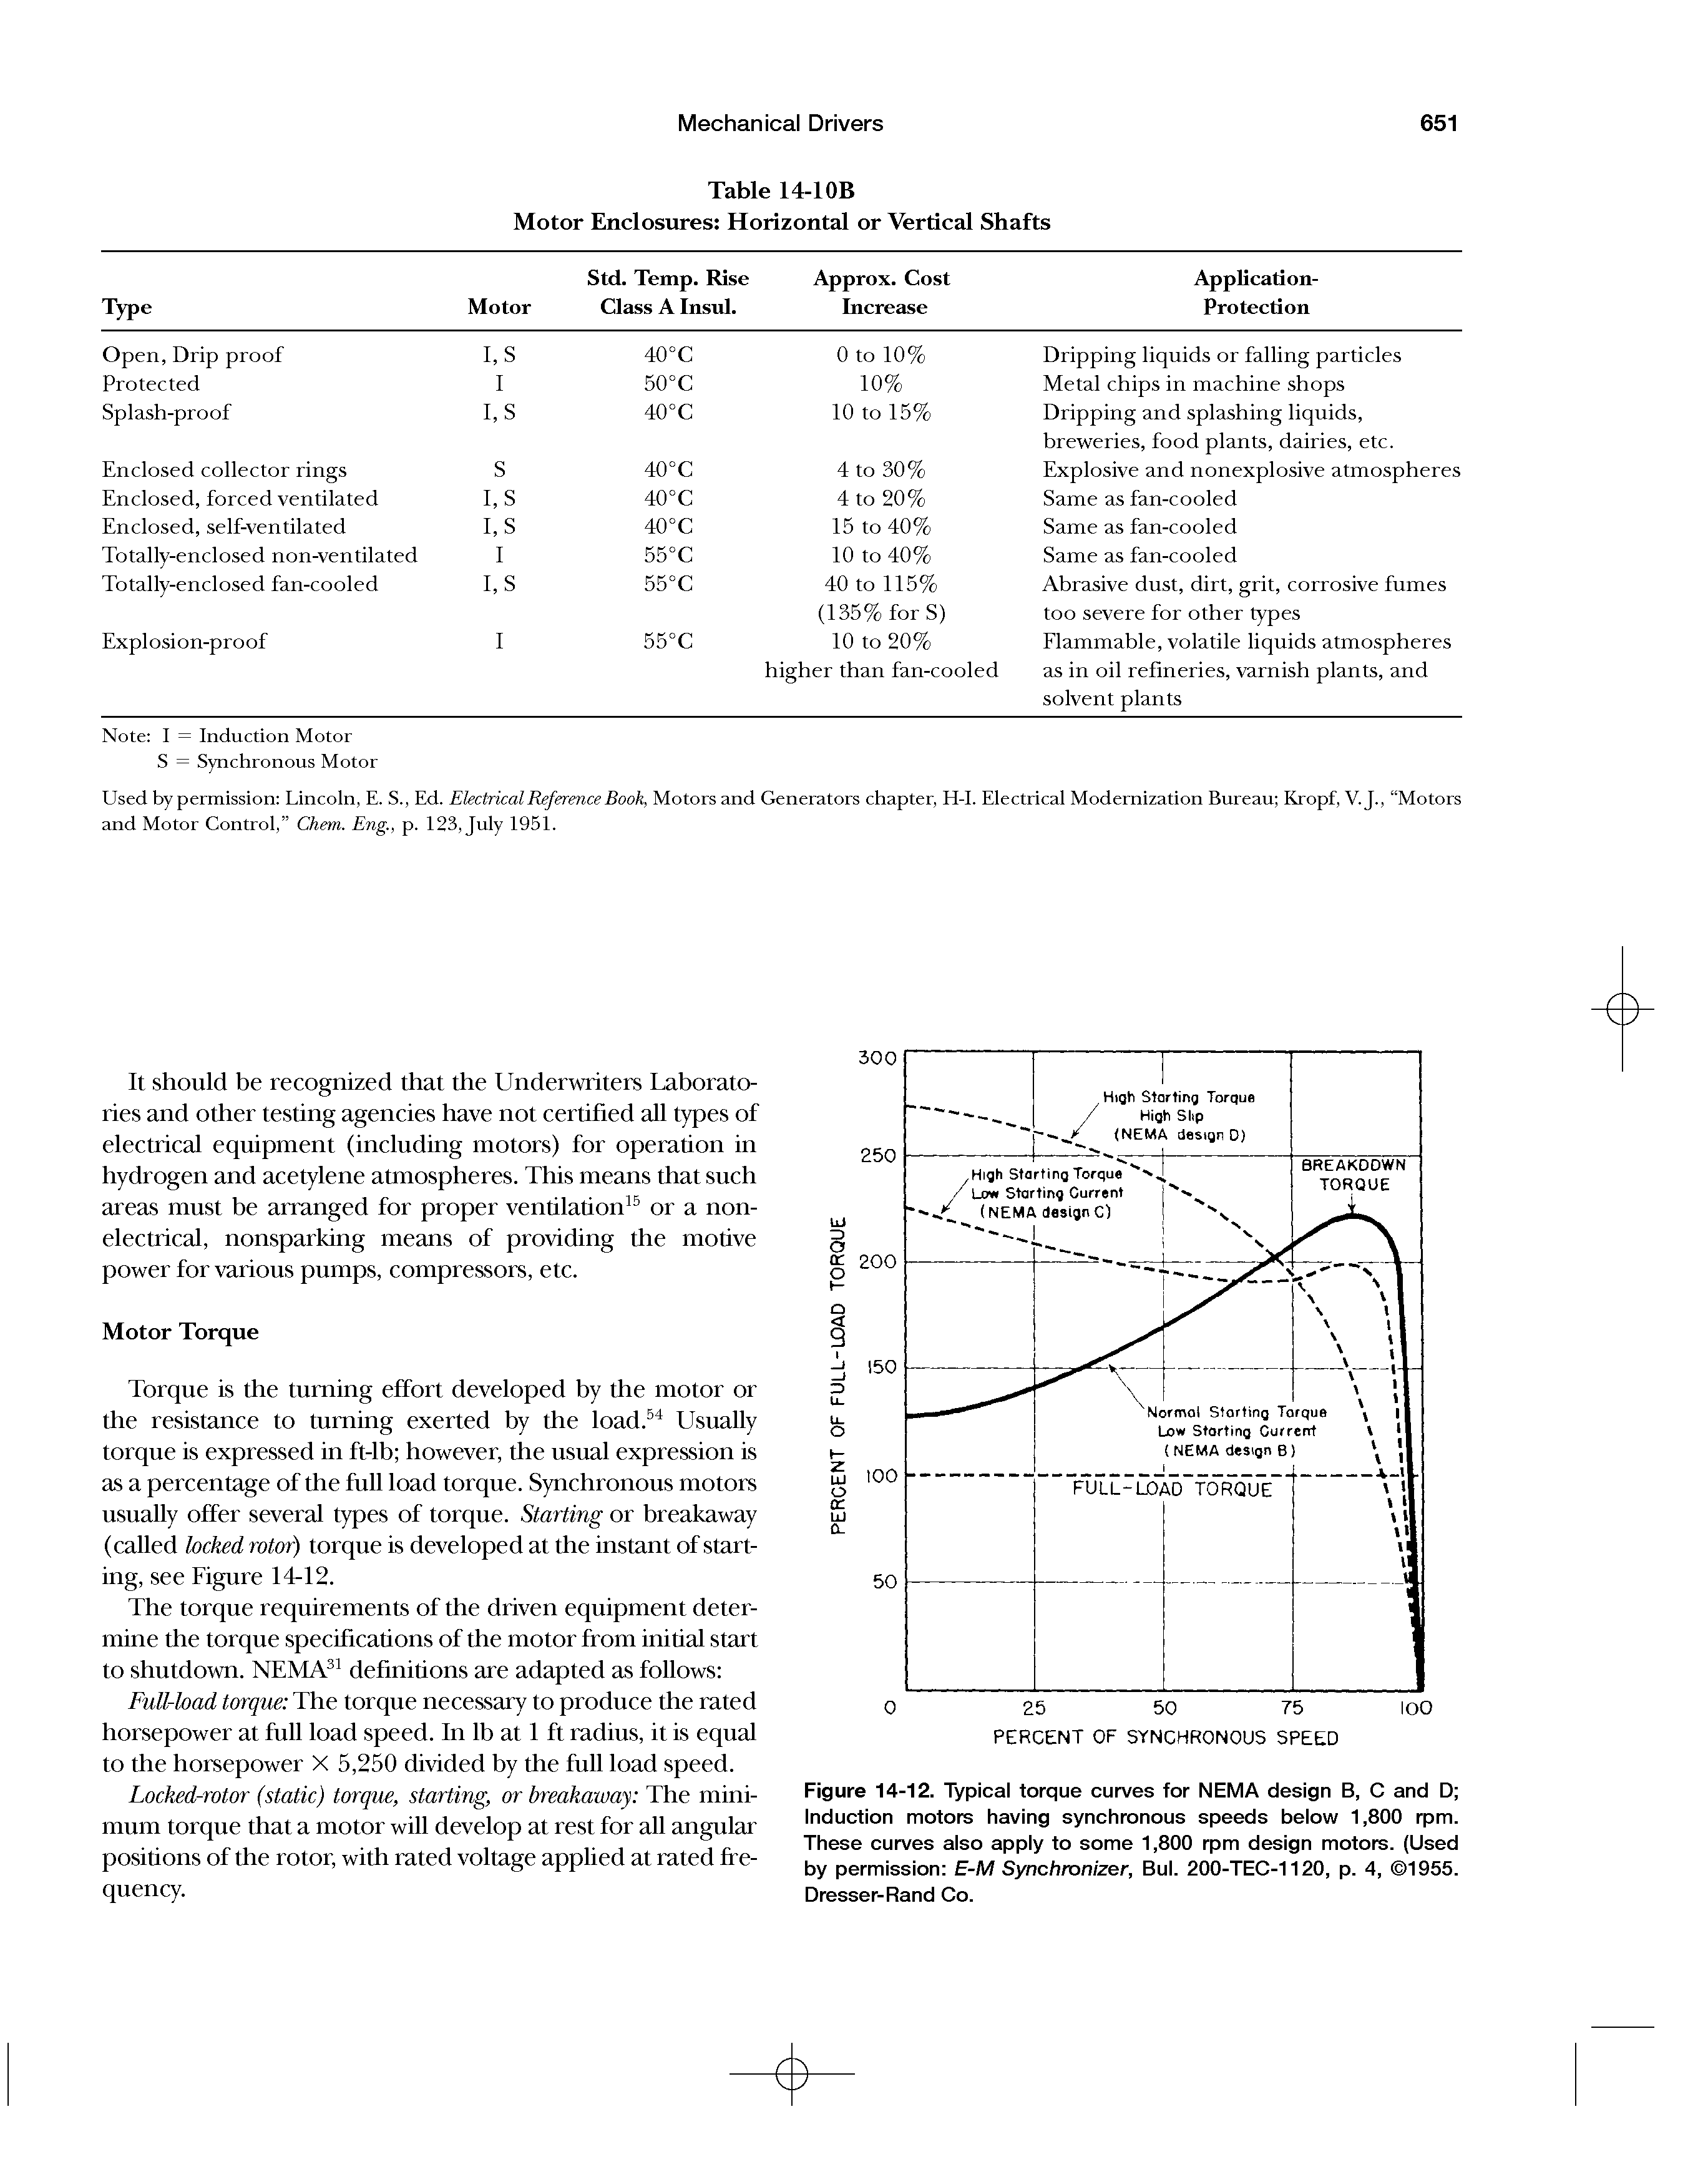 Figure 14-12. Typical torque curves for NEMA design B, C and D Induction motors having synchronous speeds below 1,800 rpm. These curves also apply to some 1,800 rpm design motors. (Used by permission E-M Synchronizer, Bui. 200-TEC-1120, p. 4, 1955. Dresser-Rand Co.